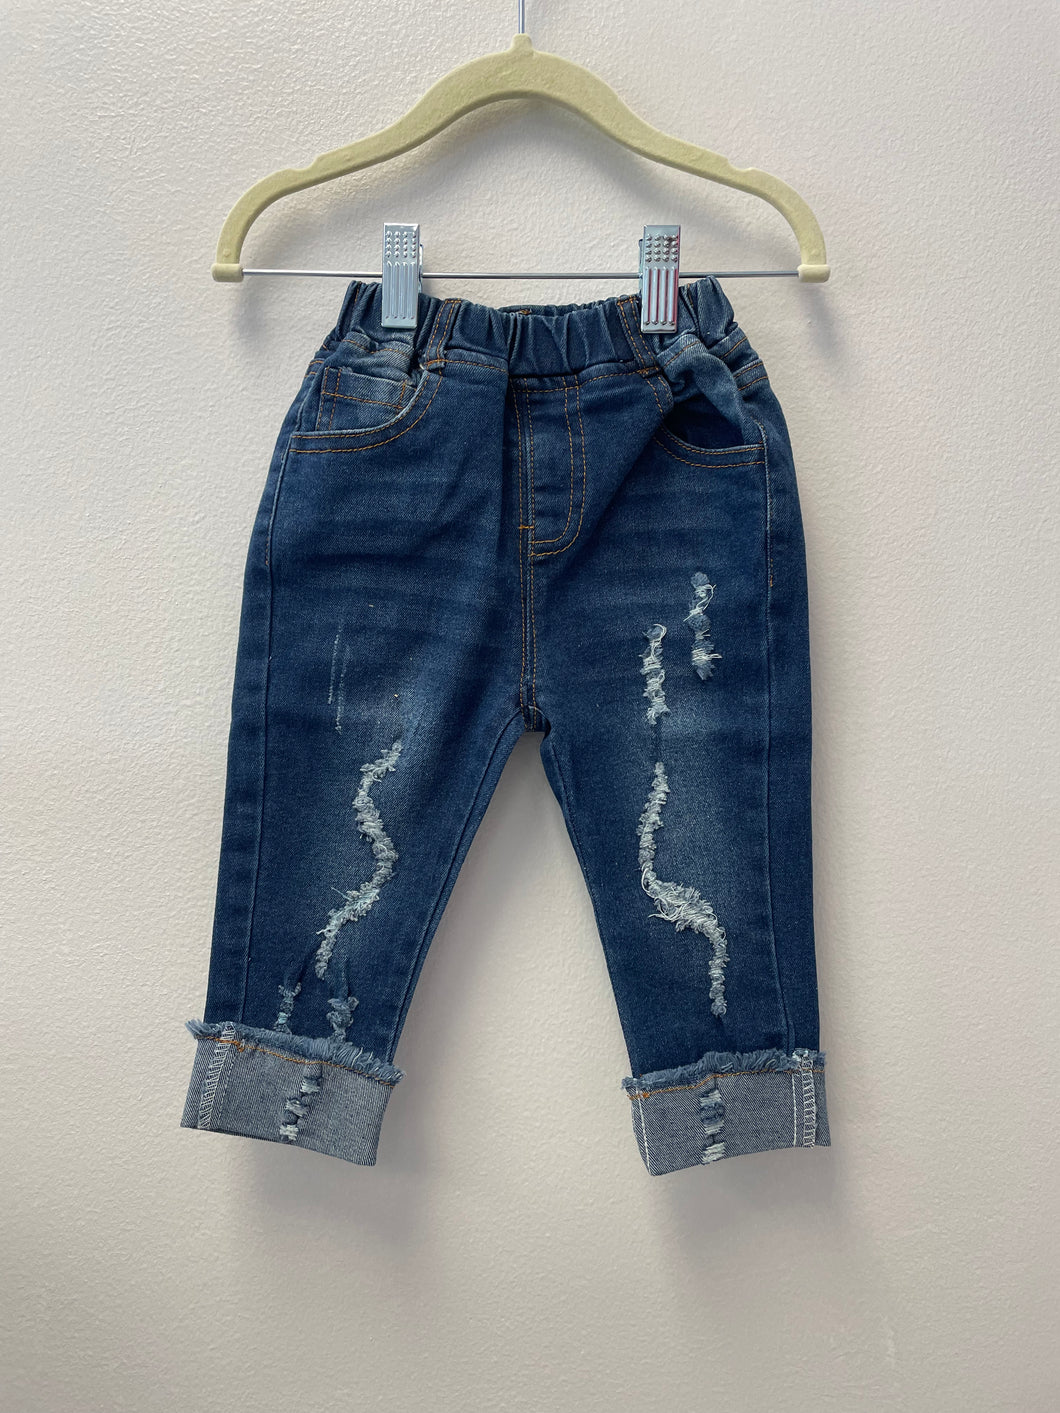 Baby jeans with trendy distressed style. Elastic waistband for added comfort.